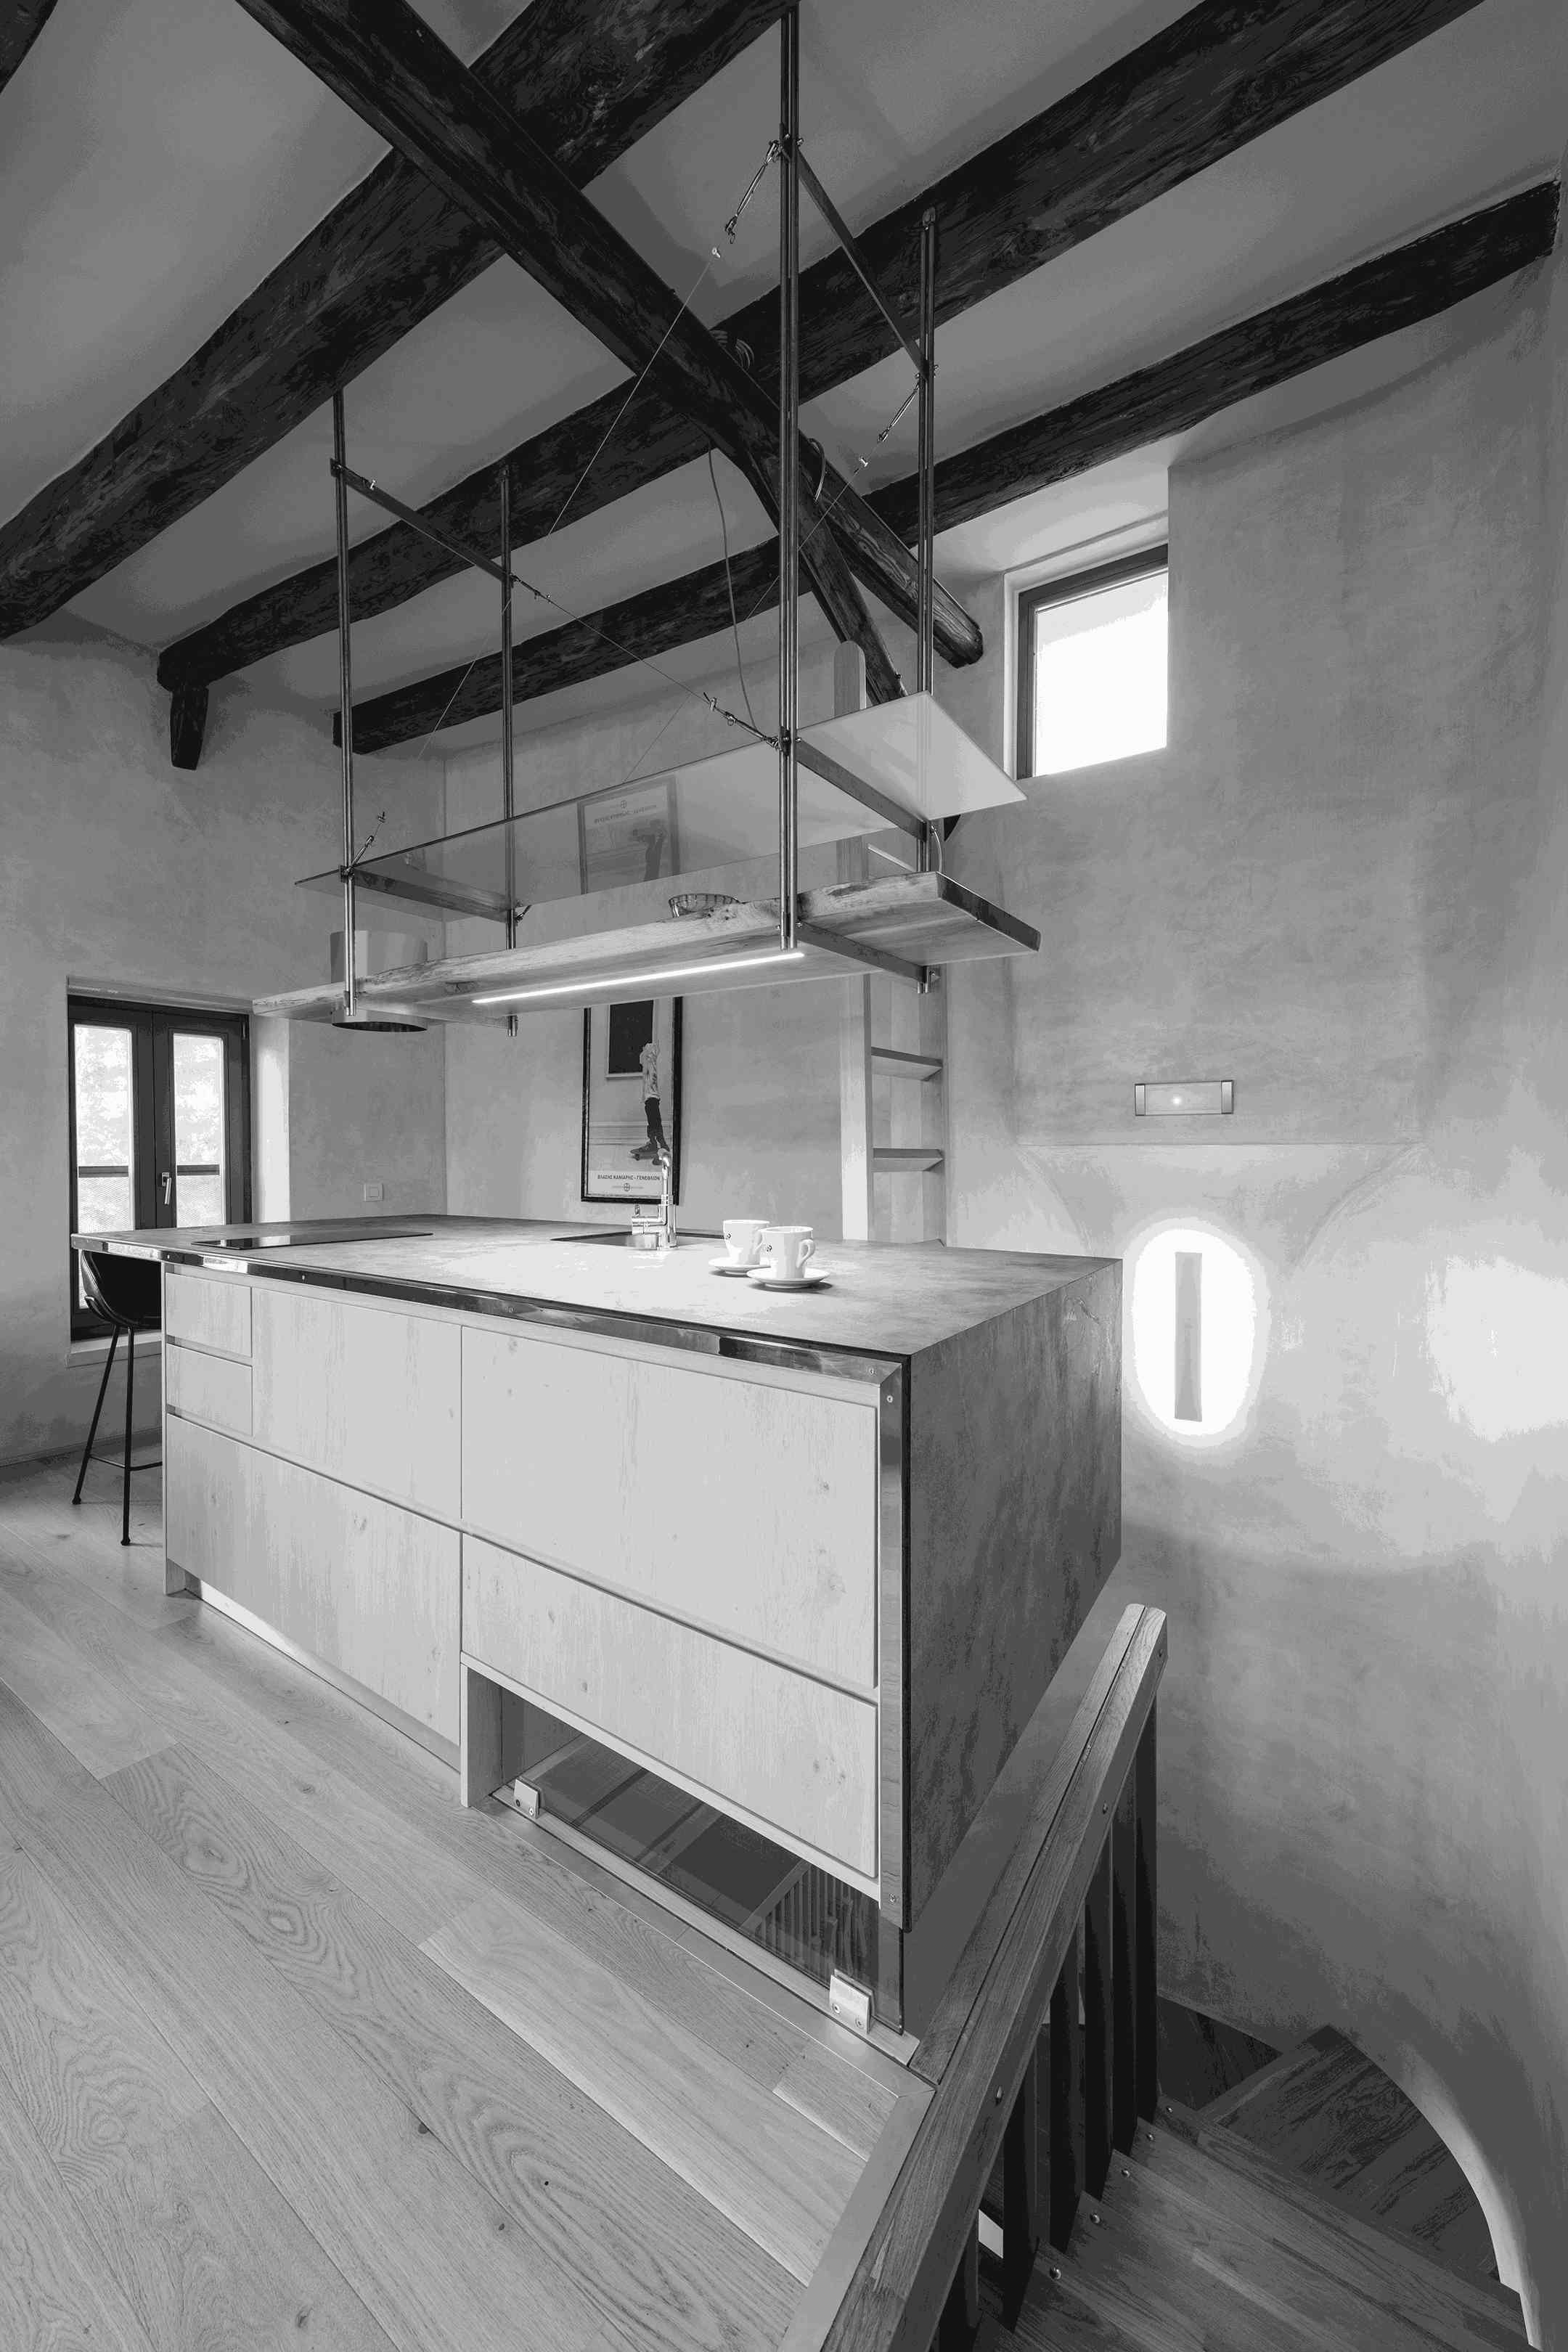 Rehabilitation of a Three Storey House in the Old Town of Chania, Crete by A&G Varoudakis Architects and I.K. Verikakis Architectural Office No4